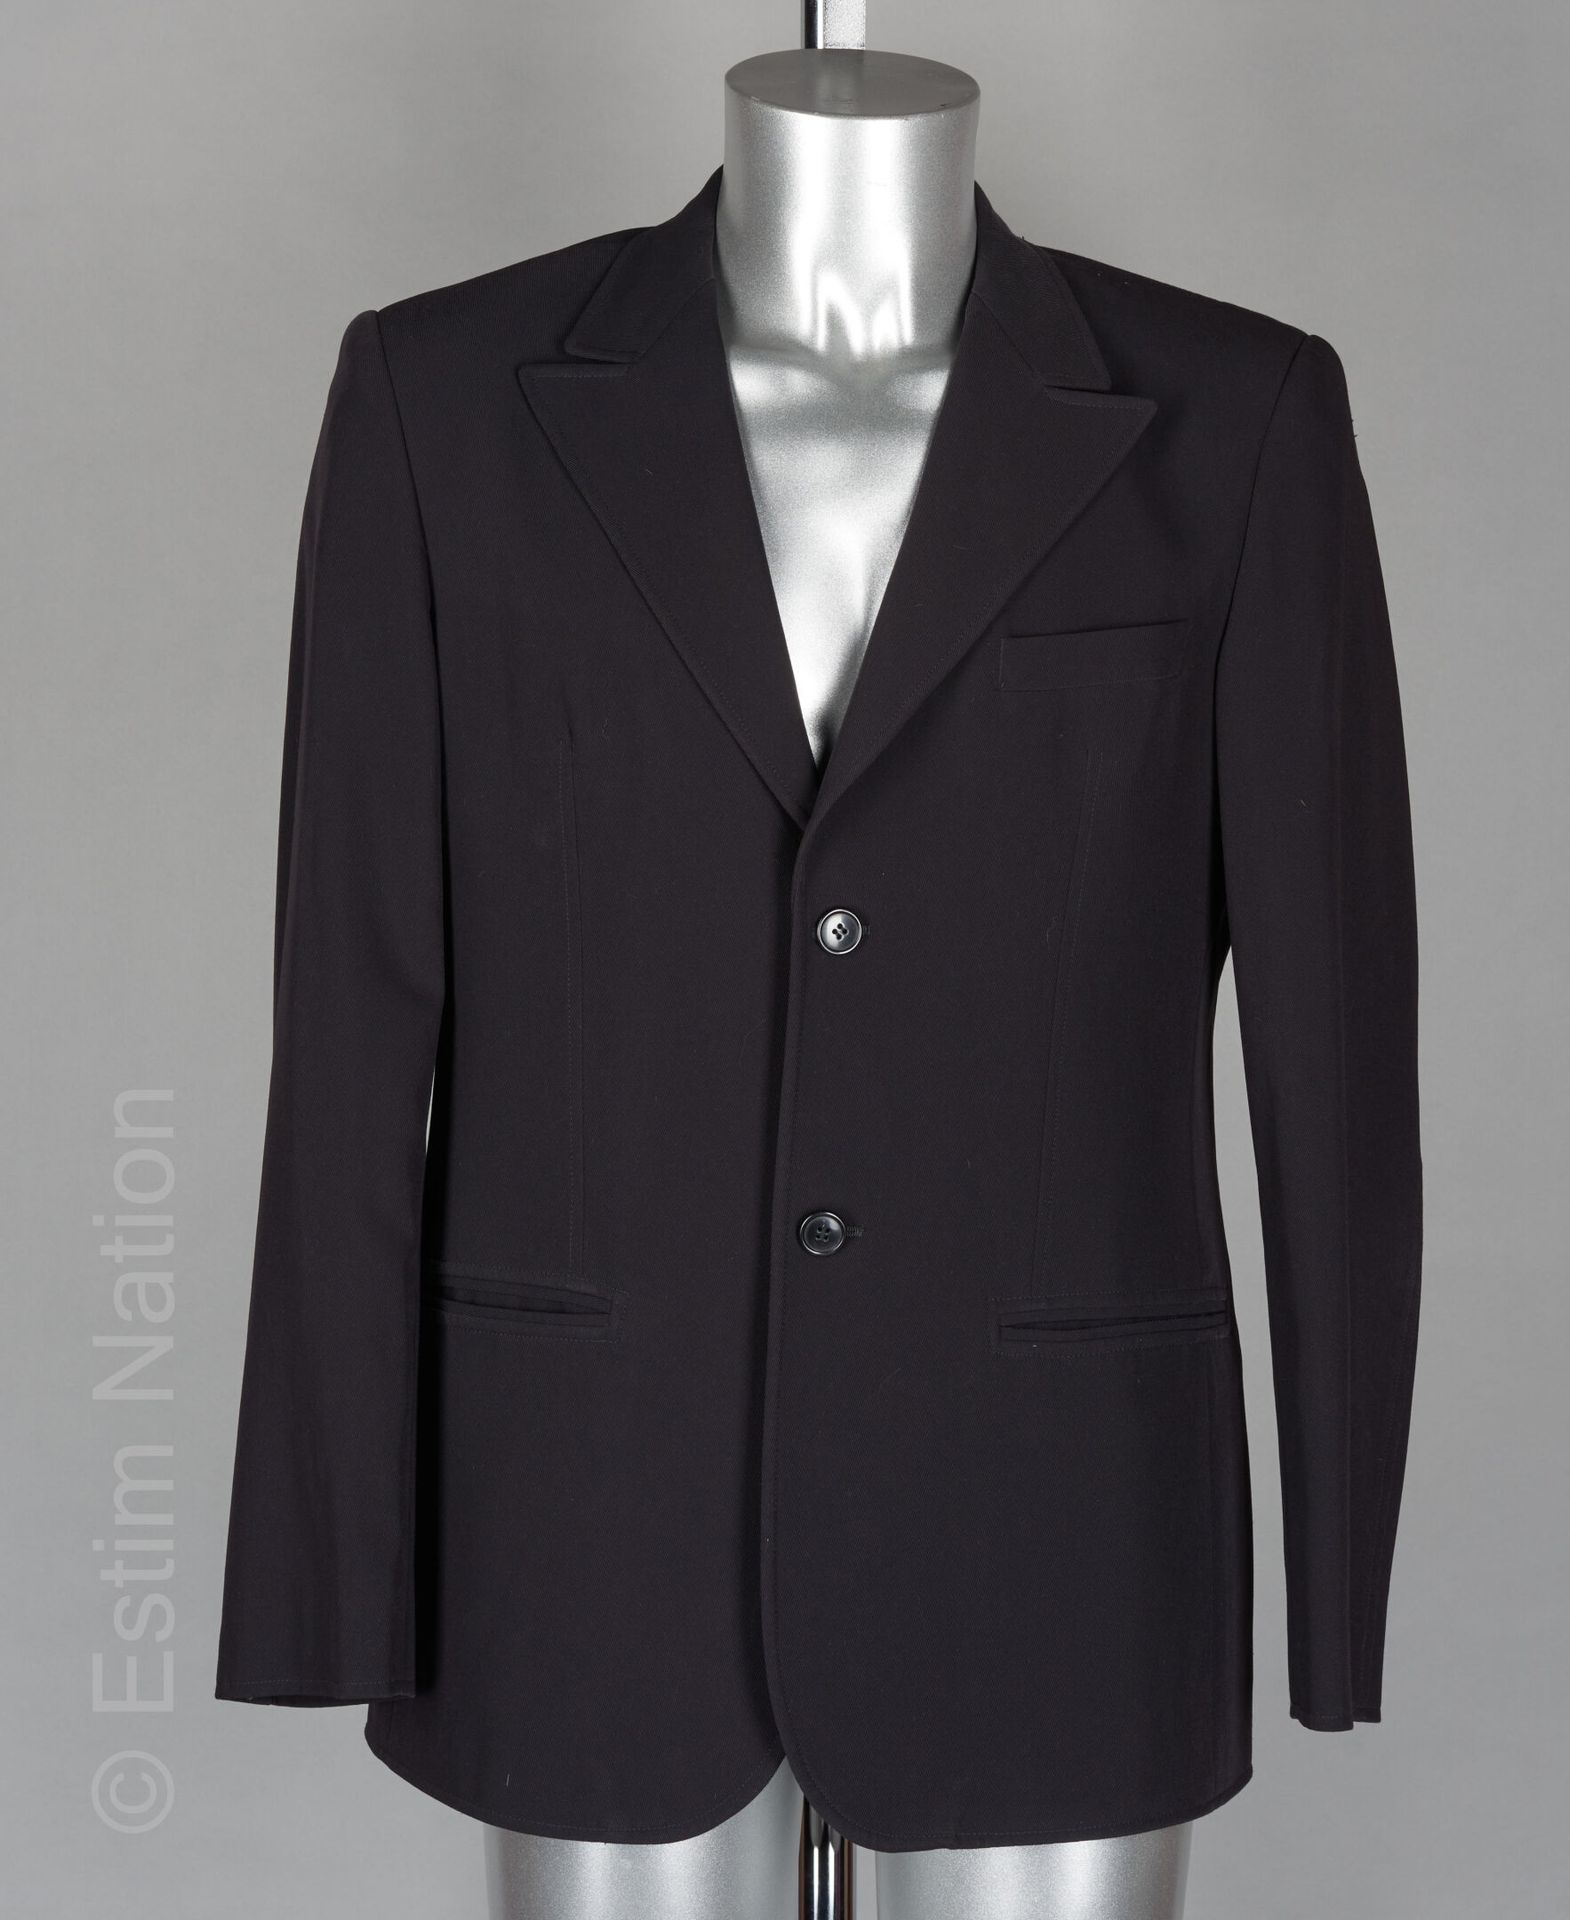 EMPORIO ARMANI Jacket in black polyester blend, notched collar (S 50) (tiny trac&hellip;